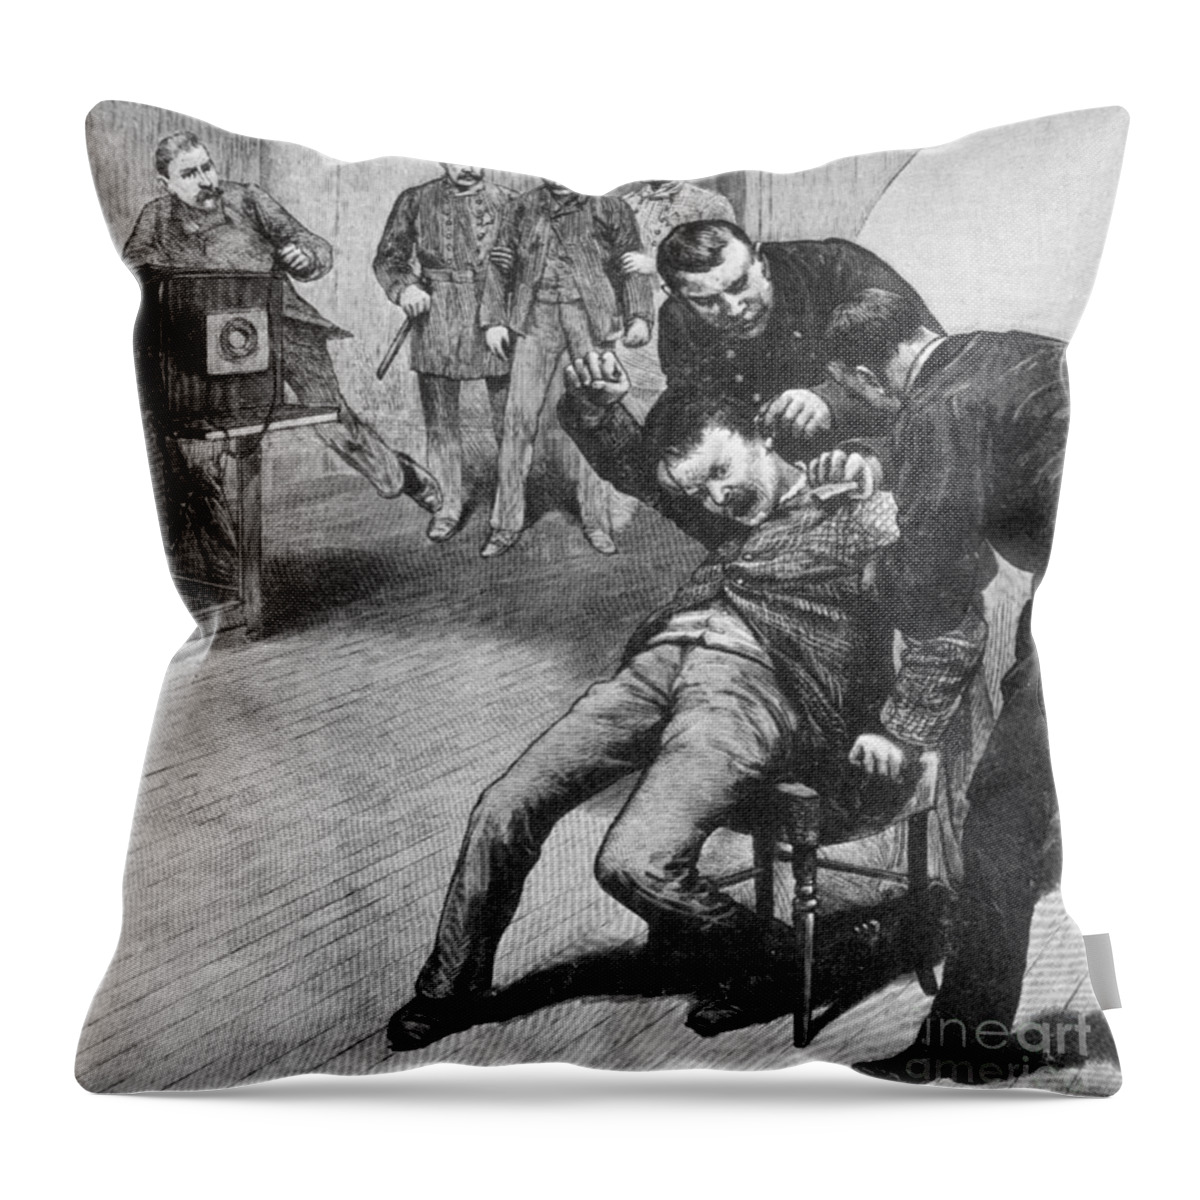 History Throw Pillow featuring the photograph Anarchist Being Held Down For Mug Shot by Photo Researchers